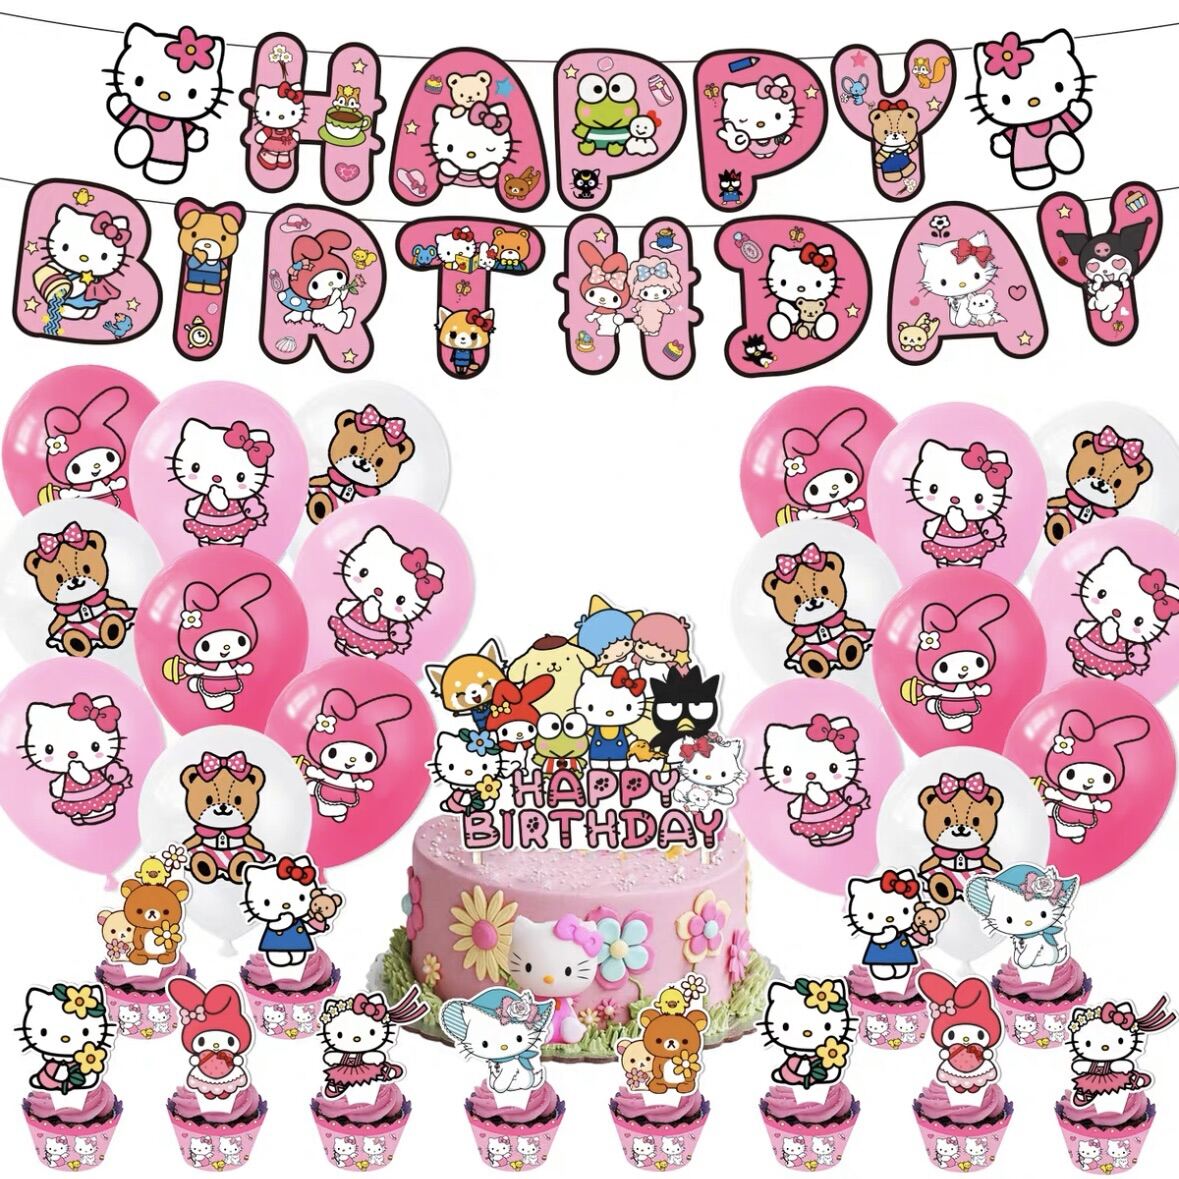 Hello Kitty Birthday Party Decoration - Best Price in Singapore